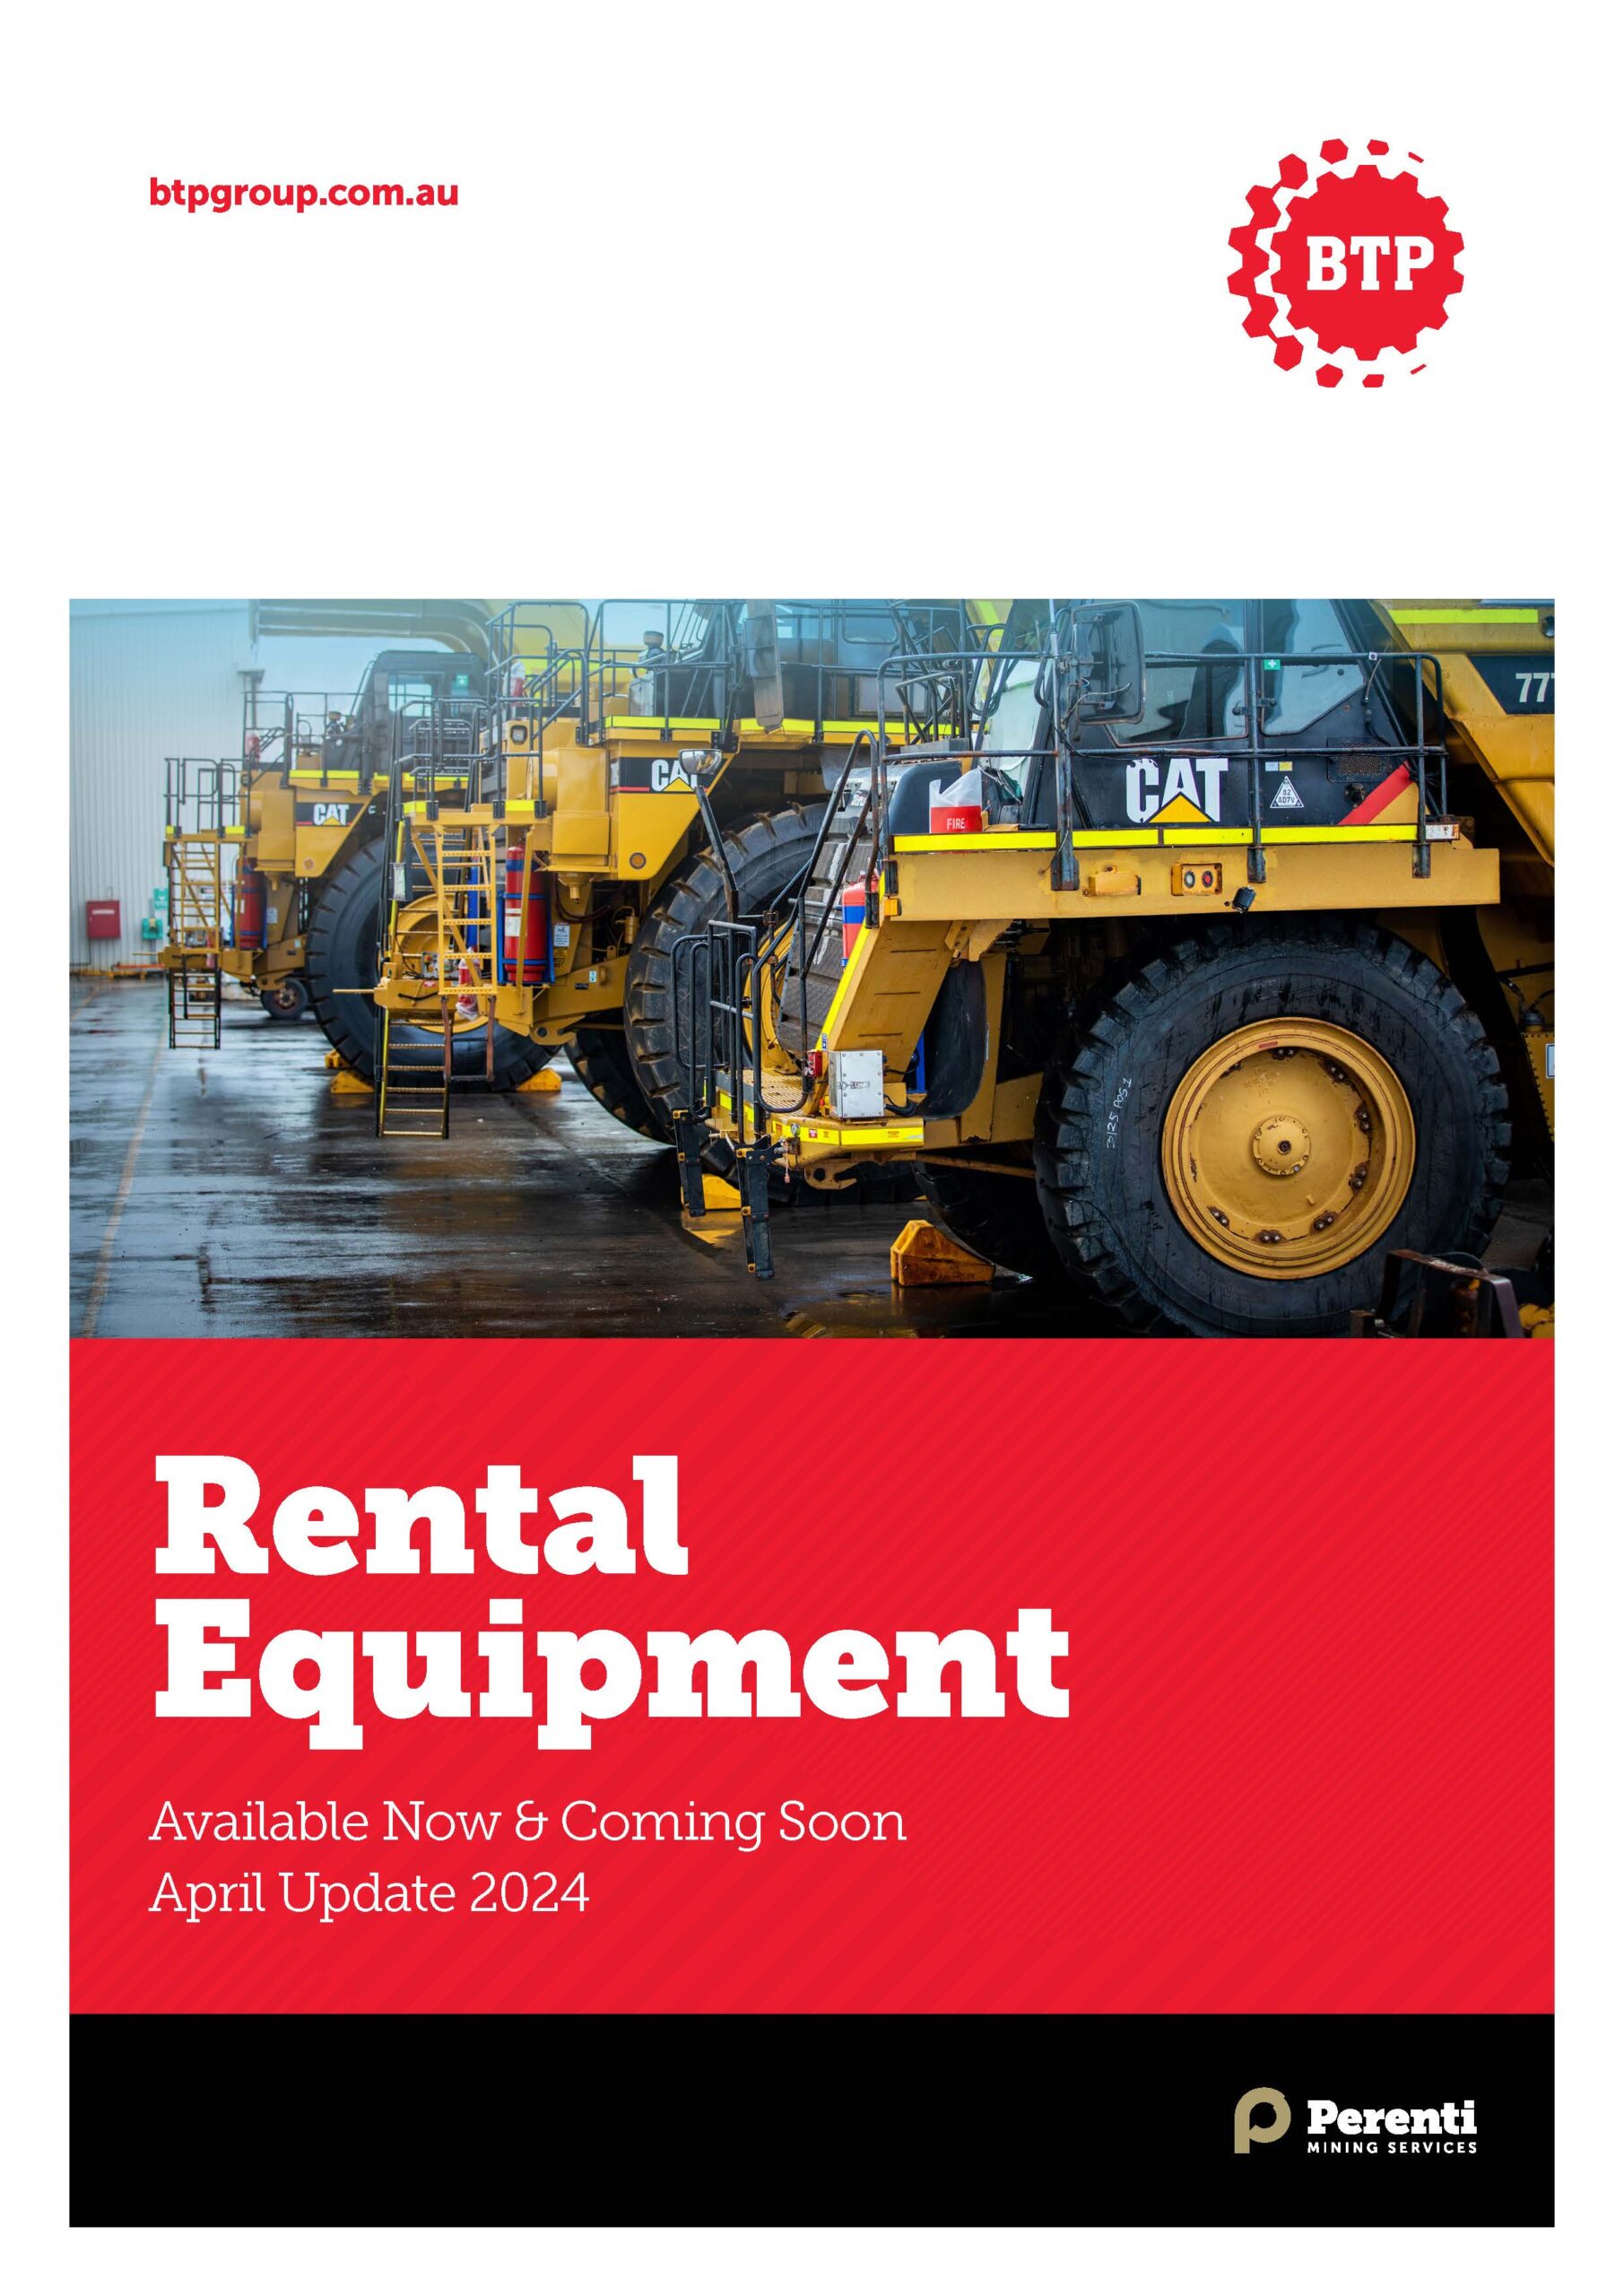 Reliable Mining Equipment - Hire • 1178 BTP Rental Available APR23 Brochure V5 2 scaled